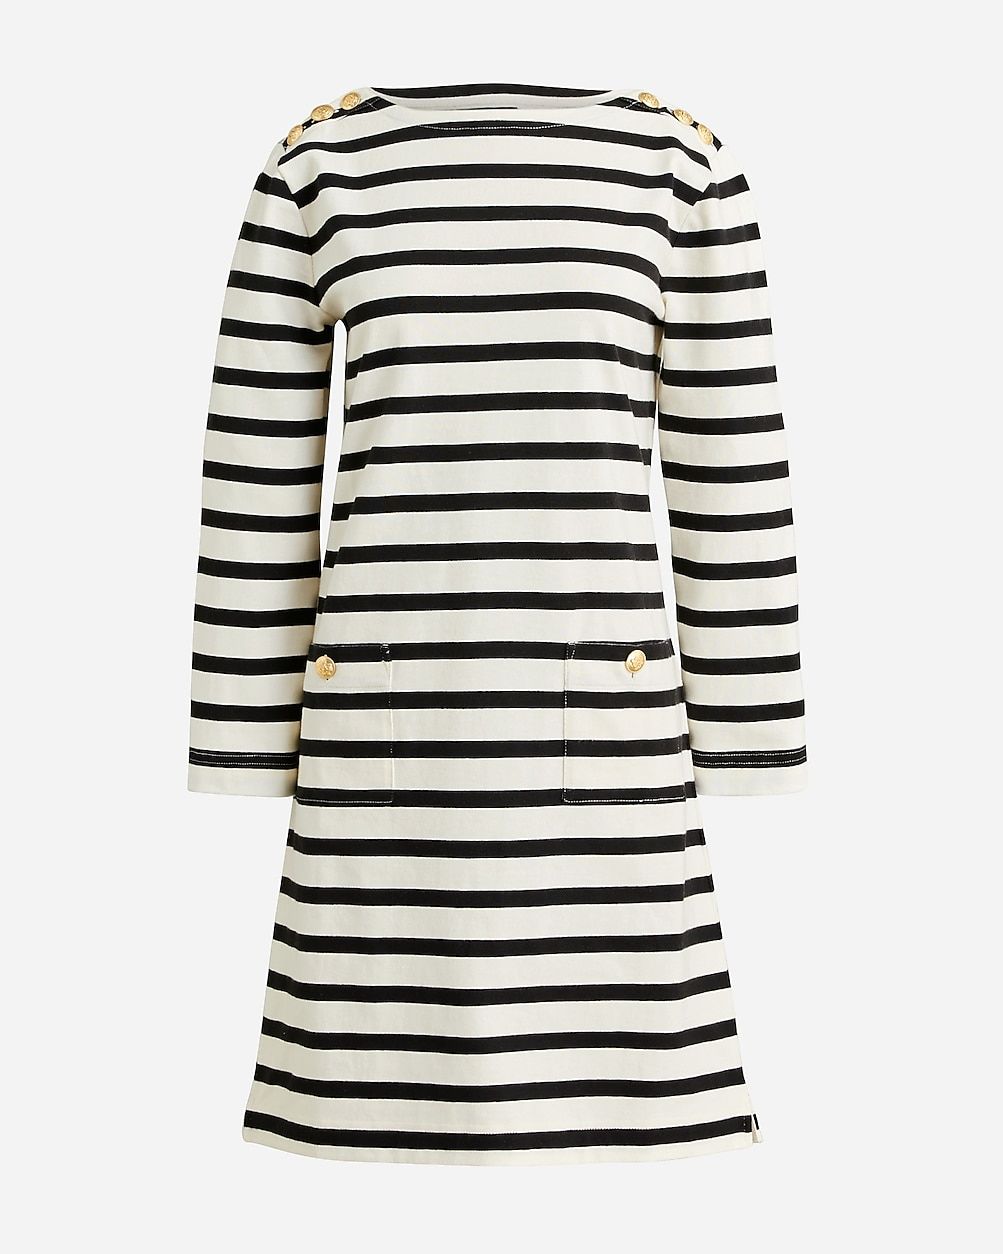 Mariner cloth shirtdress with gold buttons | J.Crew US